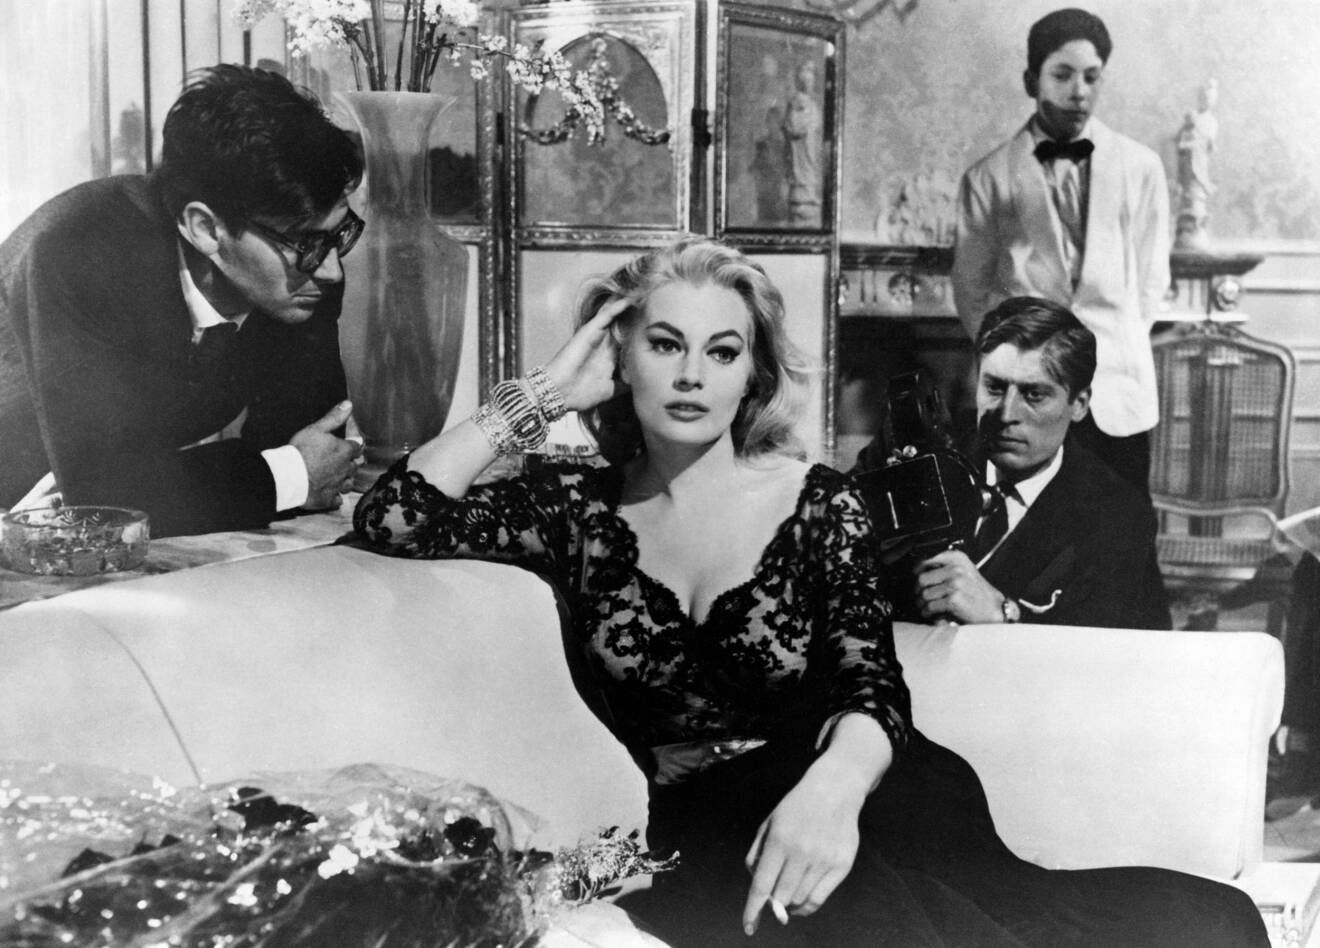 Dolce vita, La (1960)  Directed by Federico Fellini Shown: Anita Ekberg (center) When: 15 Feb 2013 Credit: WENN.com **WENN does not claim any ownership including but not limited to Copyright or License in the attached material. Fees charged by WENN are for WENN's services only, and do not, nor are they intended to, convey to the user any ownership of Copyright or License in the material. By publishing this material you expressly agree to indemnify and to hold WENN and its directors, shareholders and employees harmless from any loss, claims, damages, demands, expenses (including legal fees), or any causes of action or allegation against WENN arising out of or connected in any way with publication of the material.**